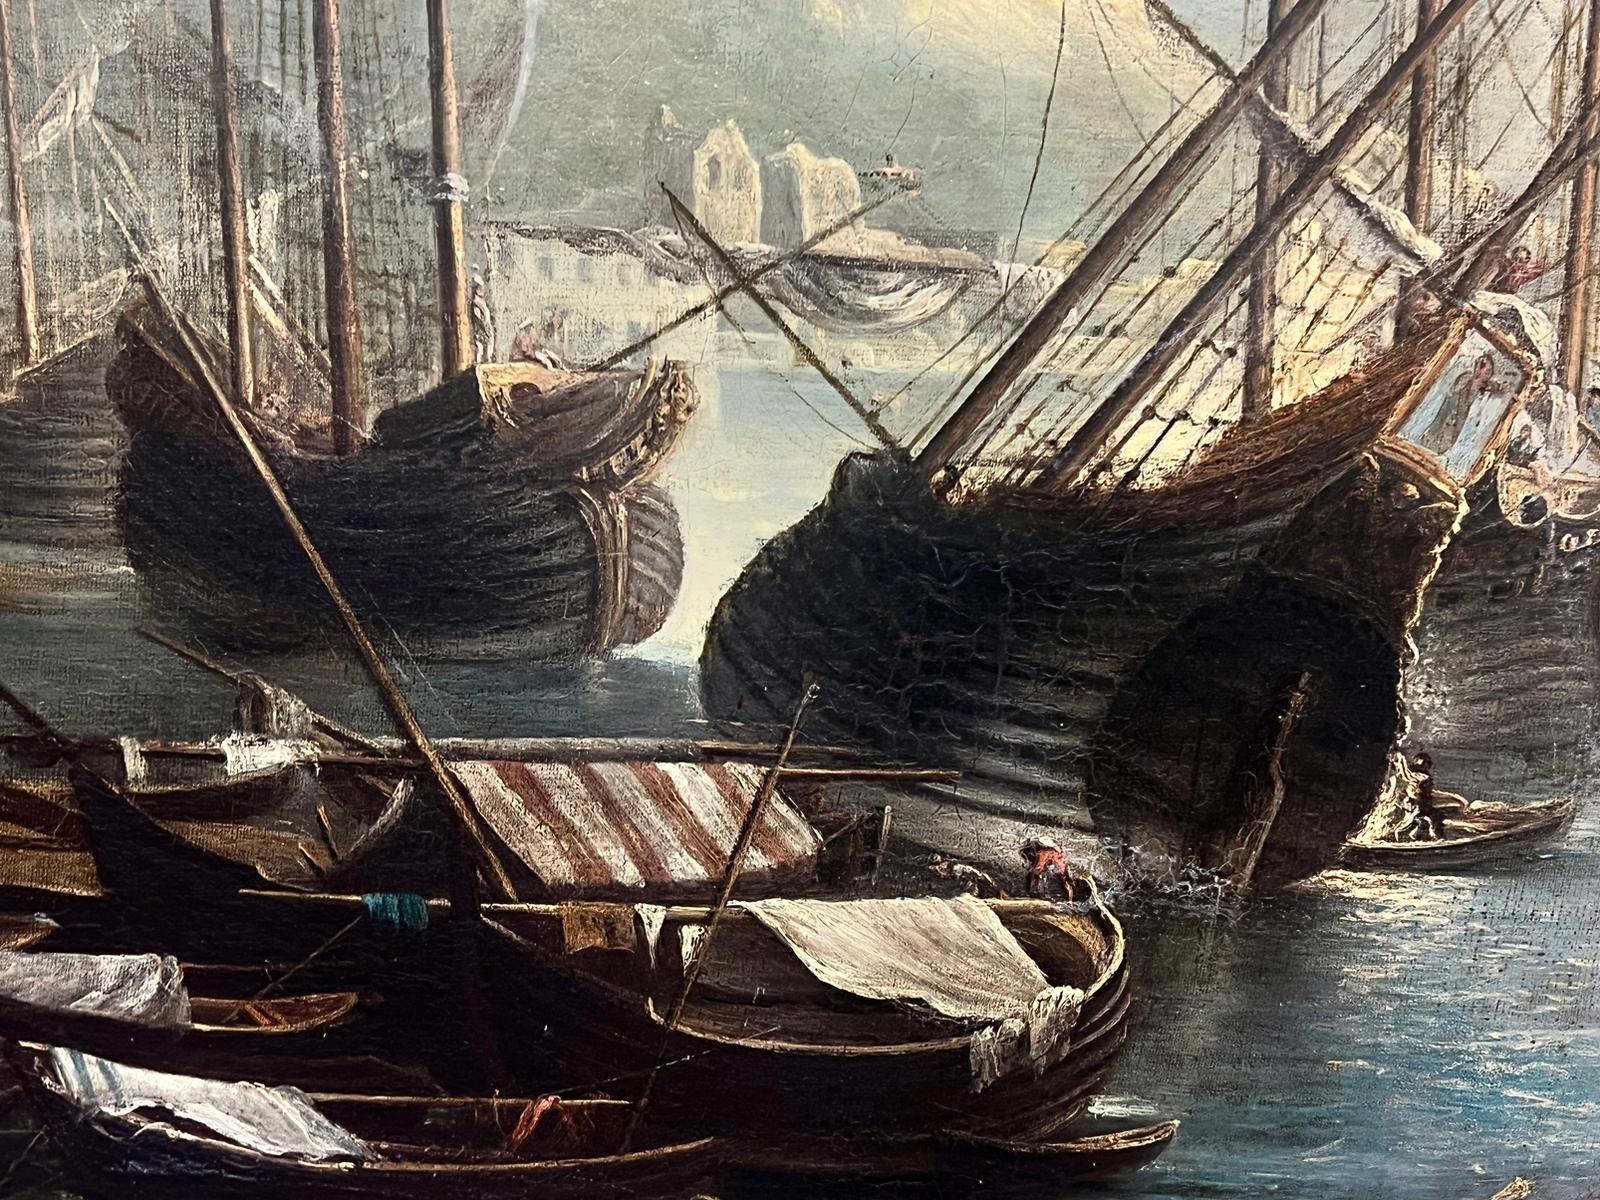 The Merchants Port
Italian School, 18th century
oil painting on canvas, framed
framed: 37 x 58 inches
canvas: 32 x 52 inches
provenance: private collection, UK
condition: very good and sound condition, relined canvas, minor surface scuff marks. 
